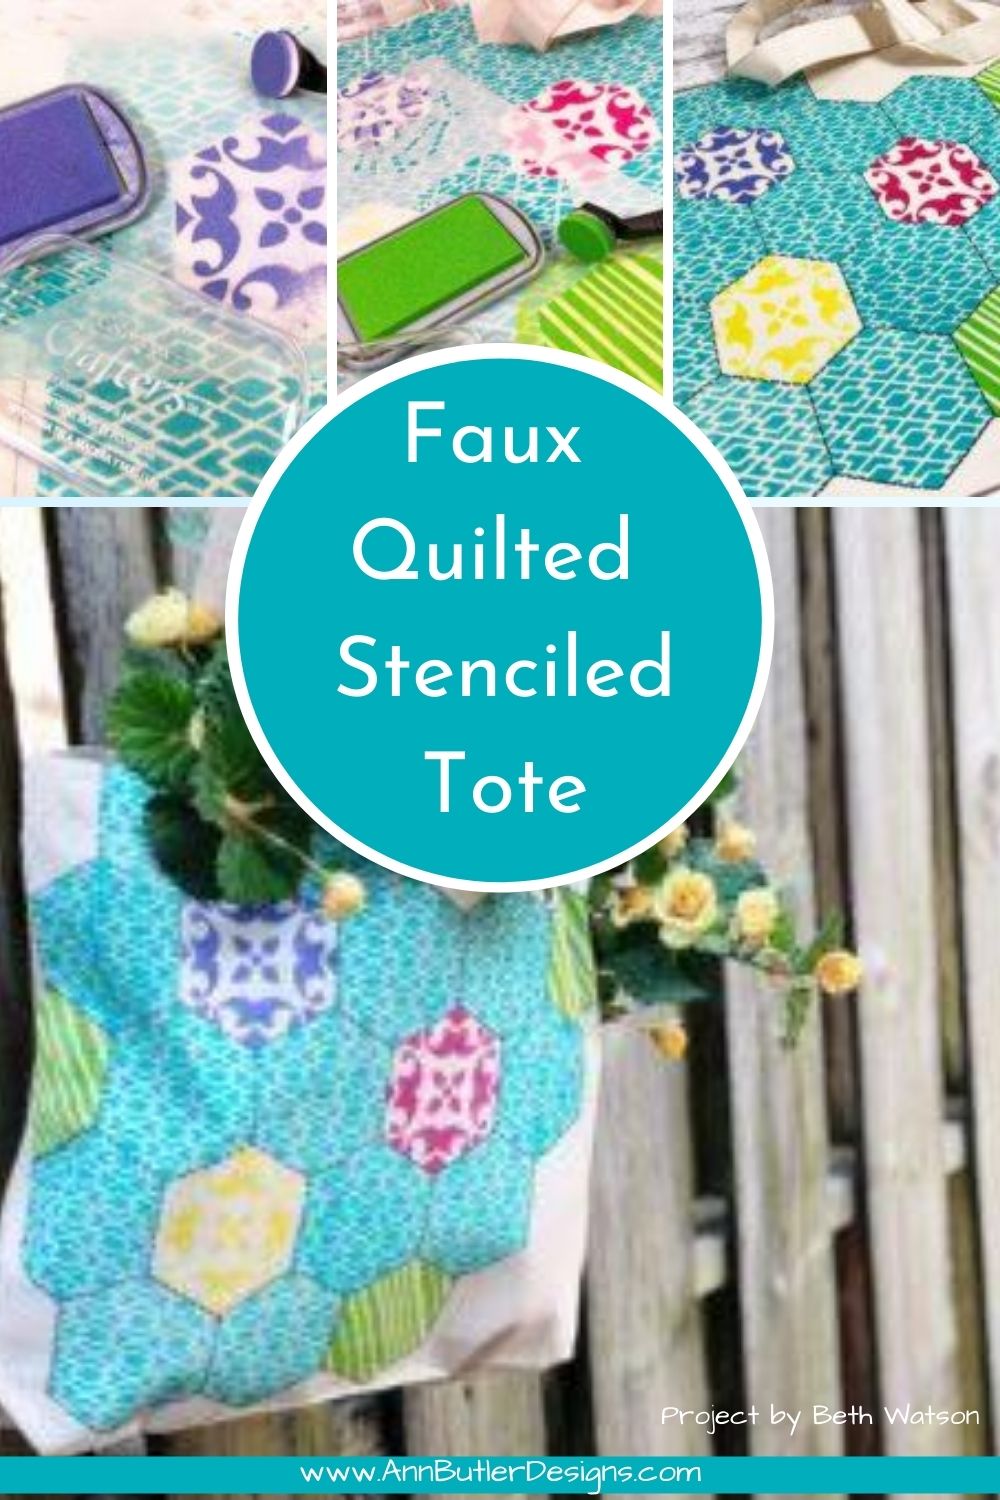 Faux Quilted Stenciled Market Tote Pin